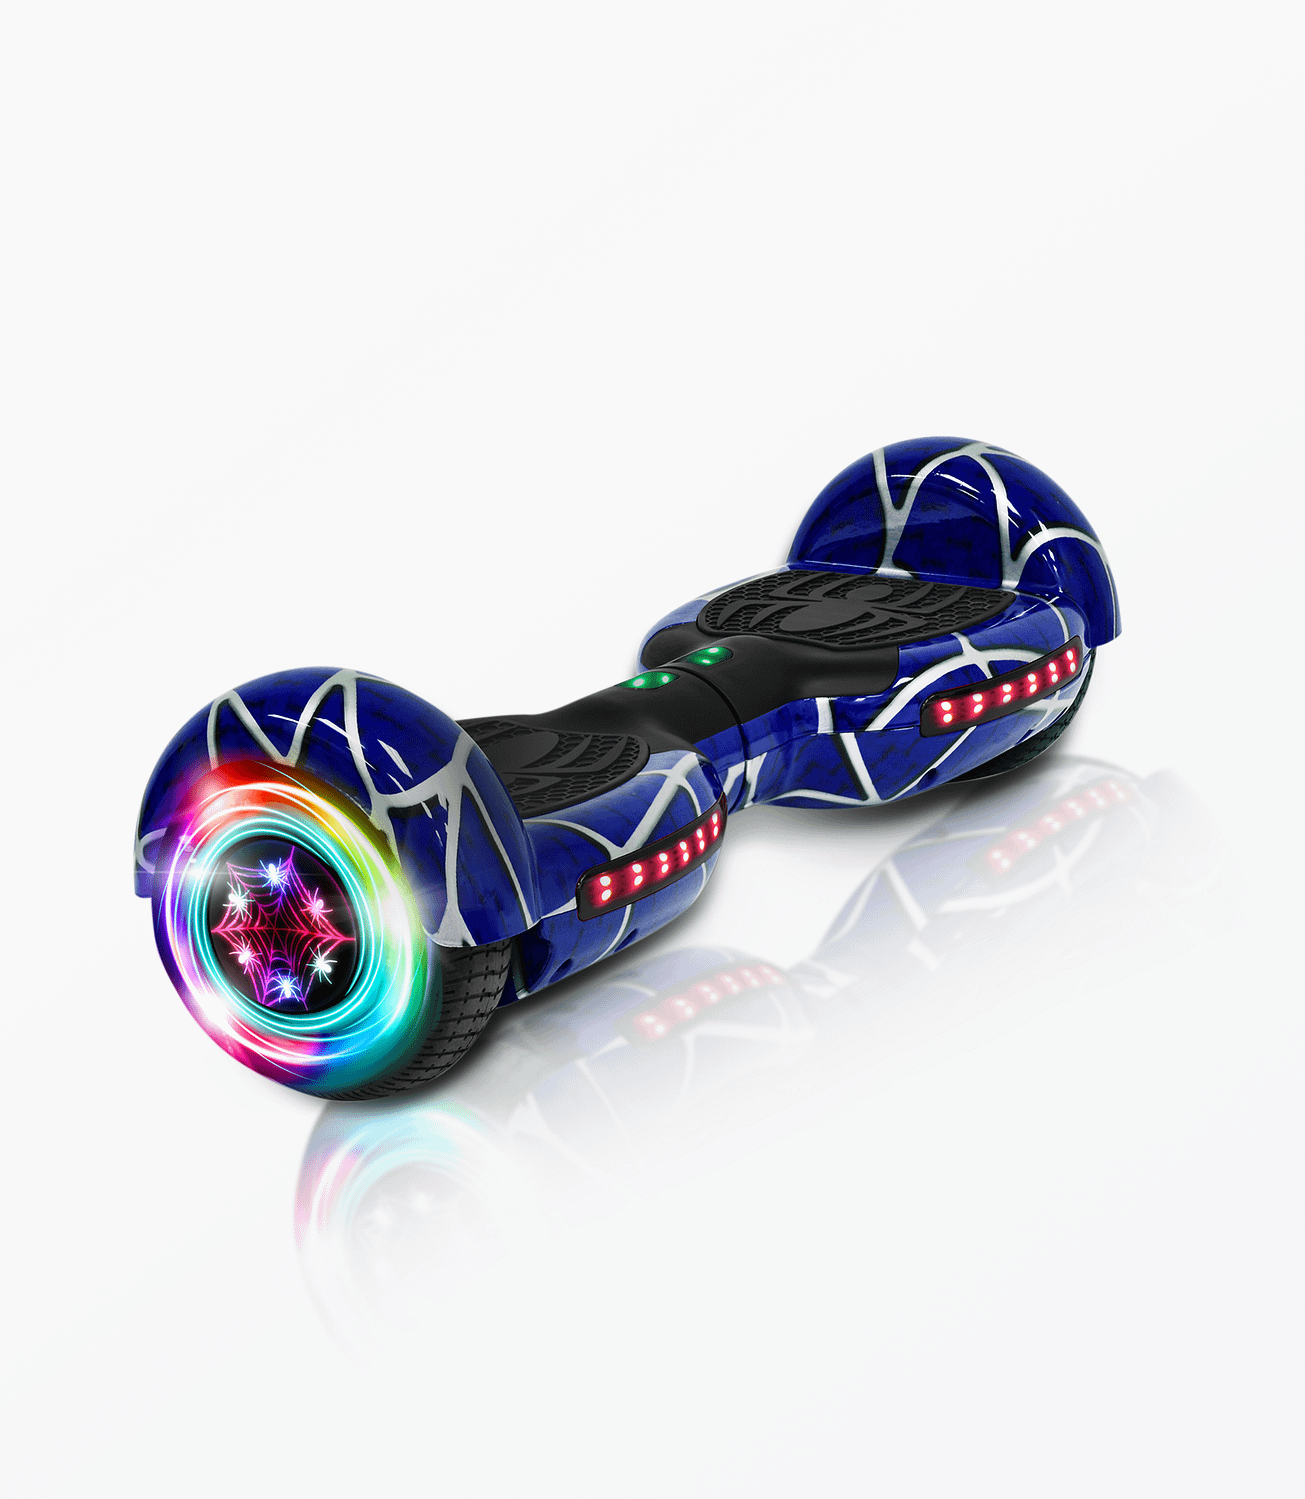 hoverboard-product-blue